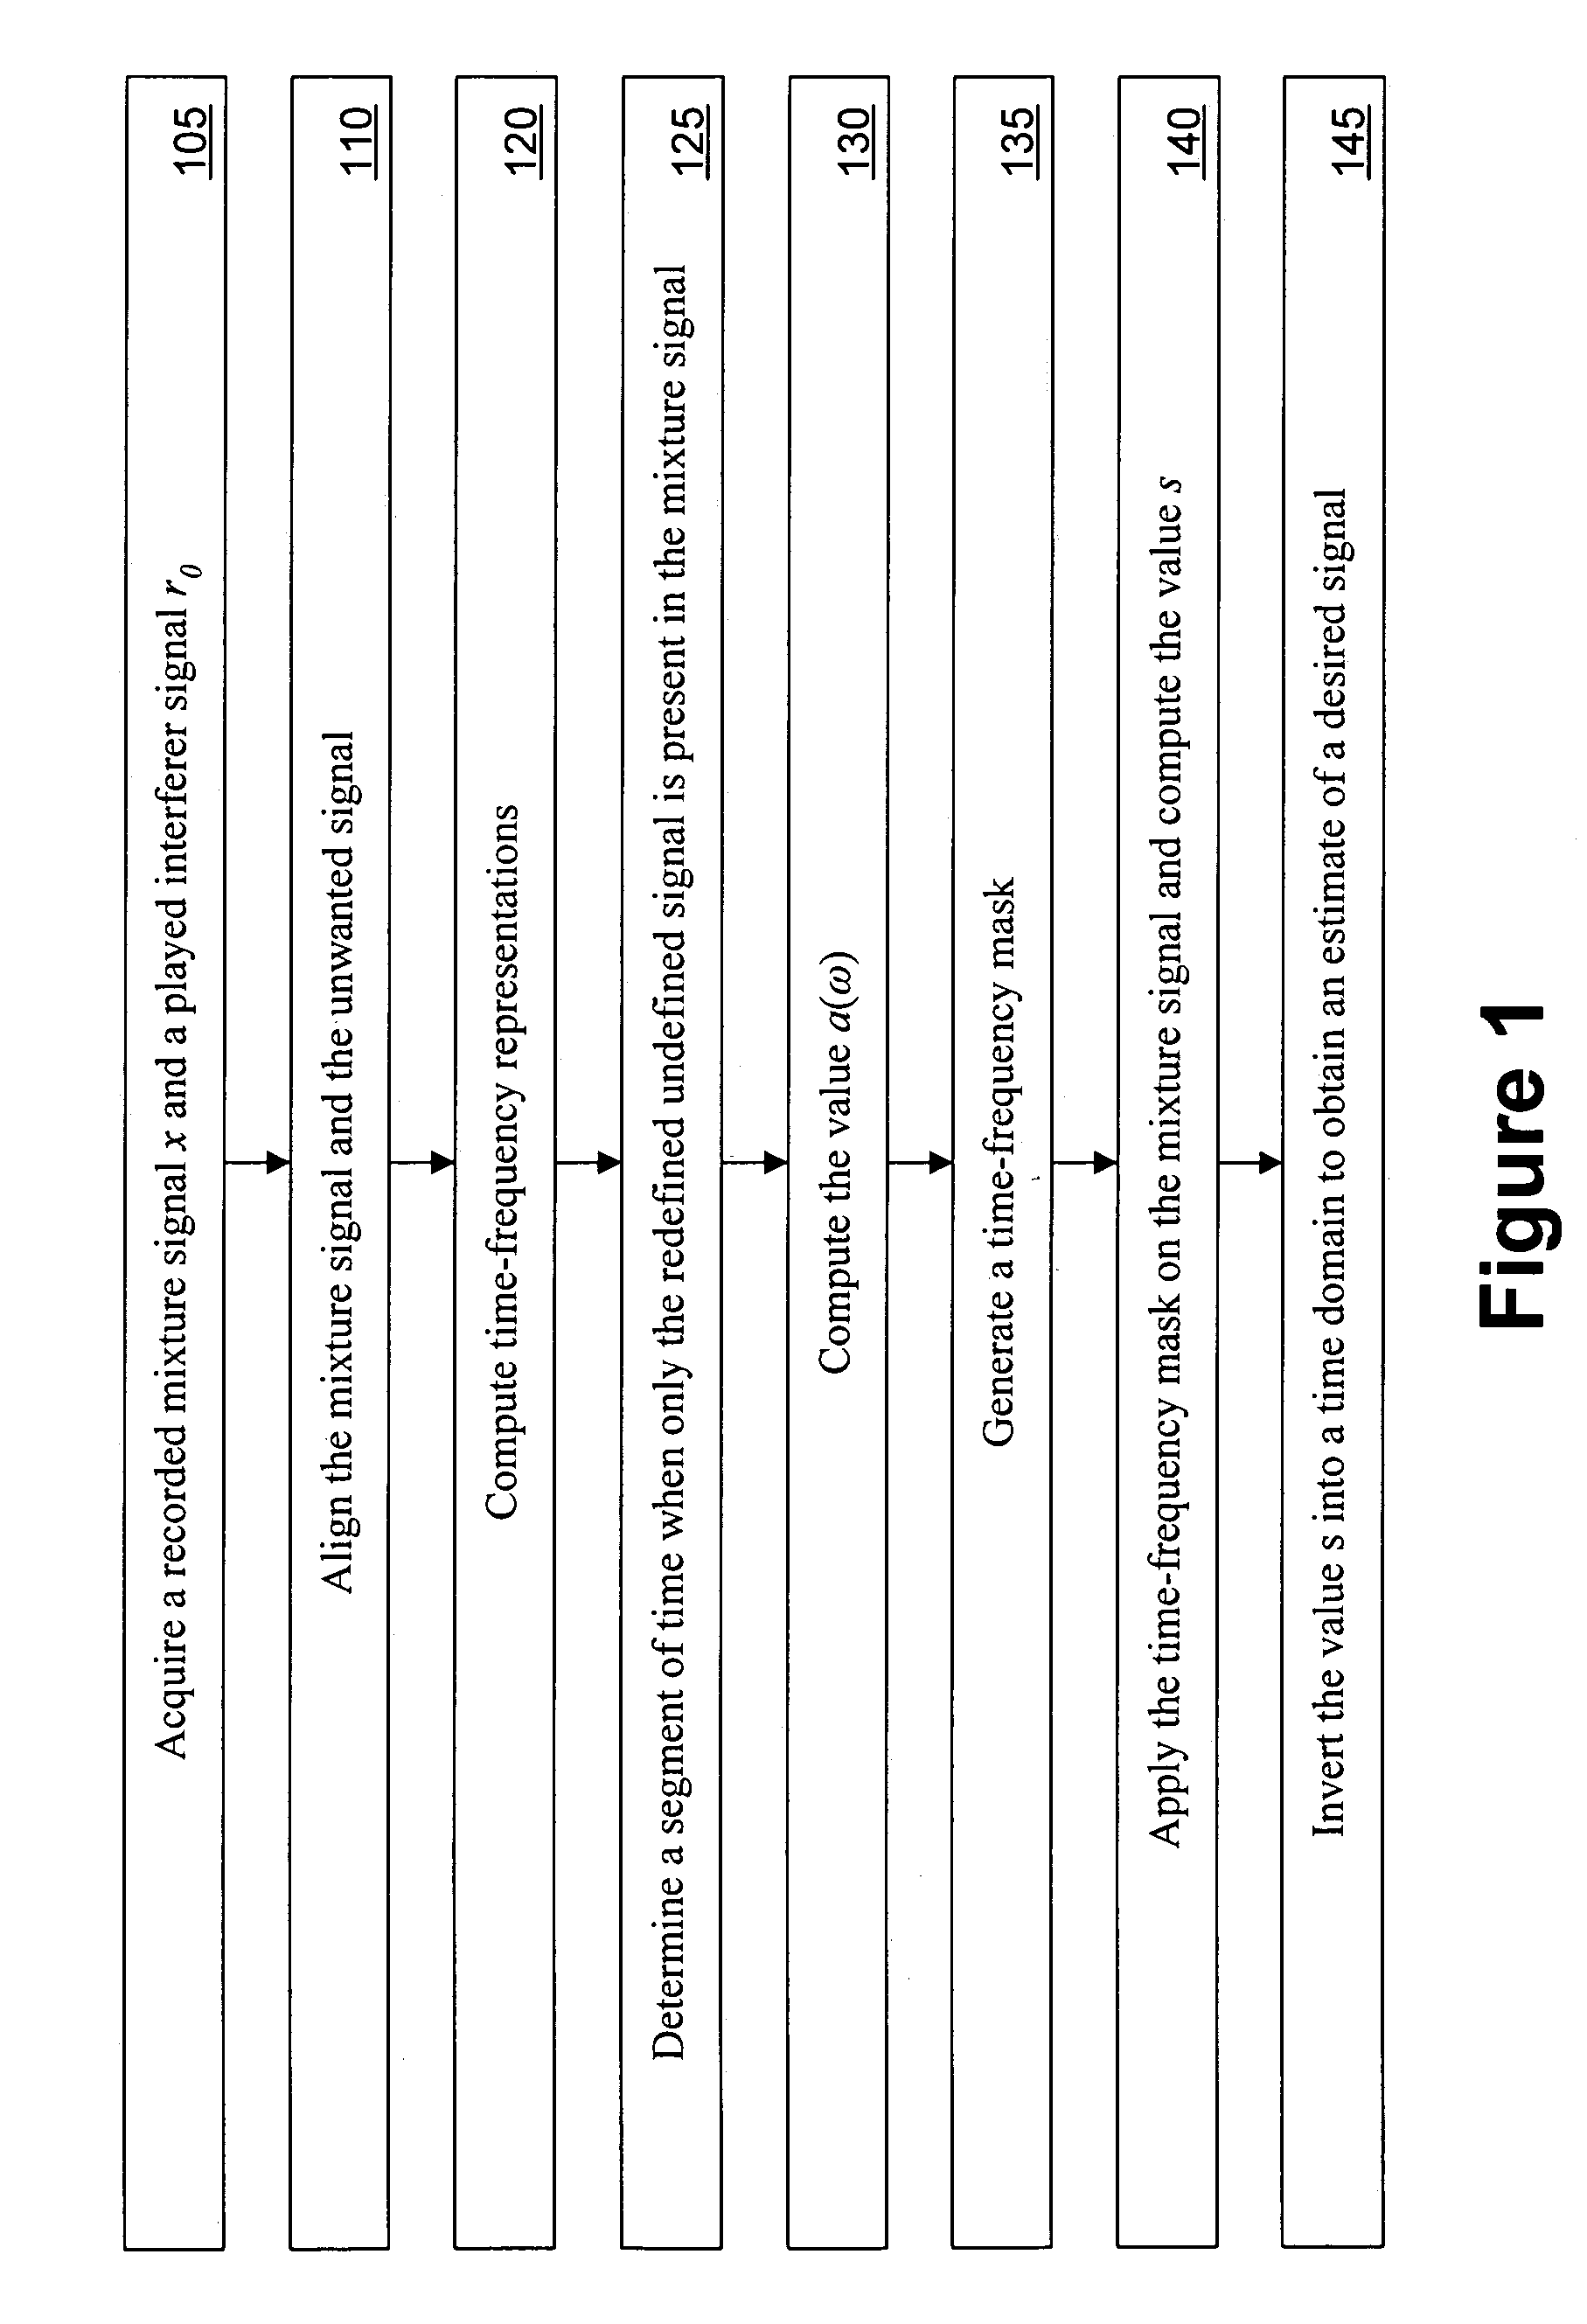 Method for eliminating an unwanted signal from a mixture via time-frequency masking